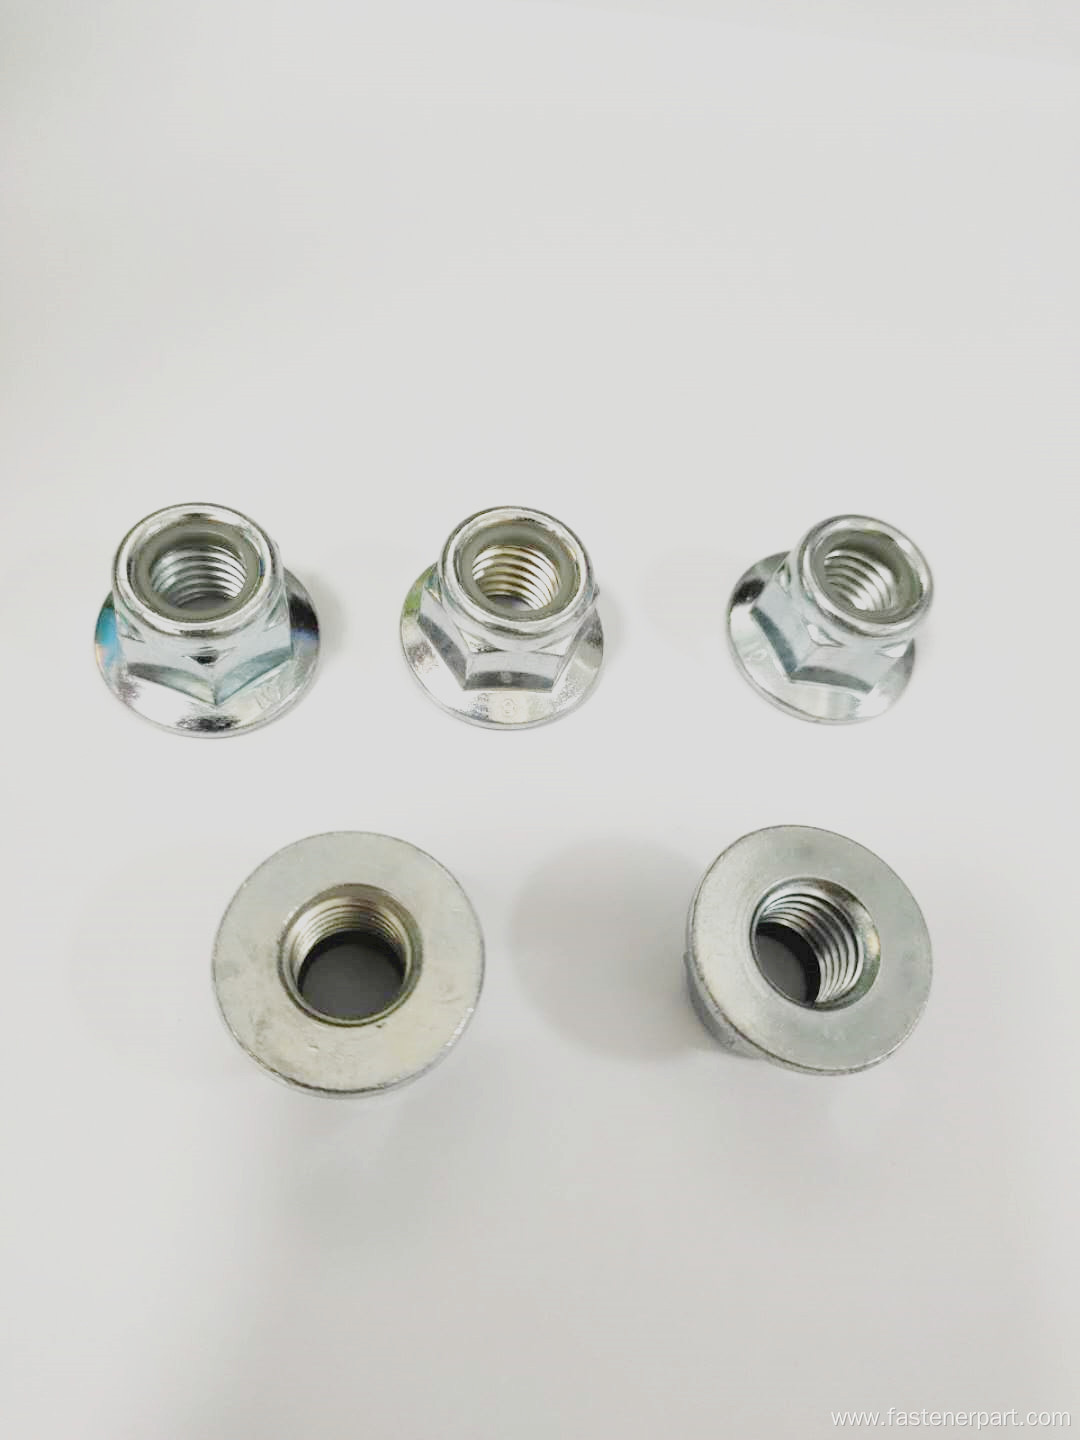 Standard Tyre Flange Lock Nuts For Rims